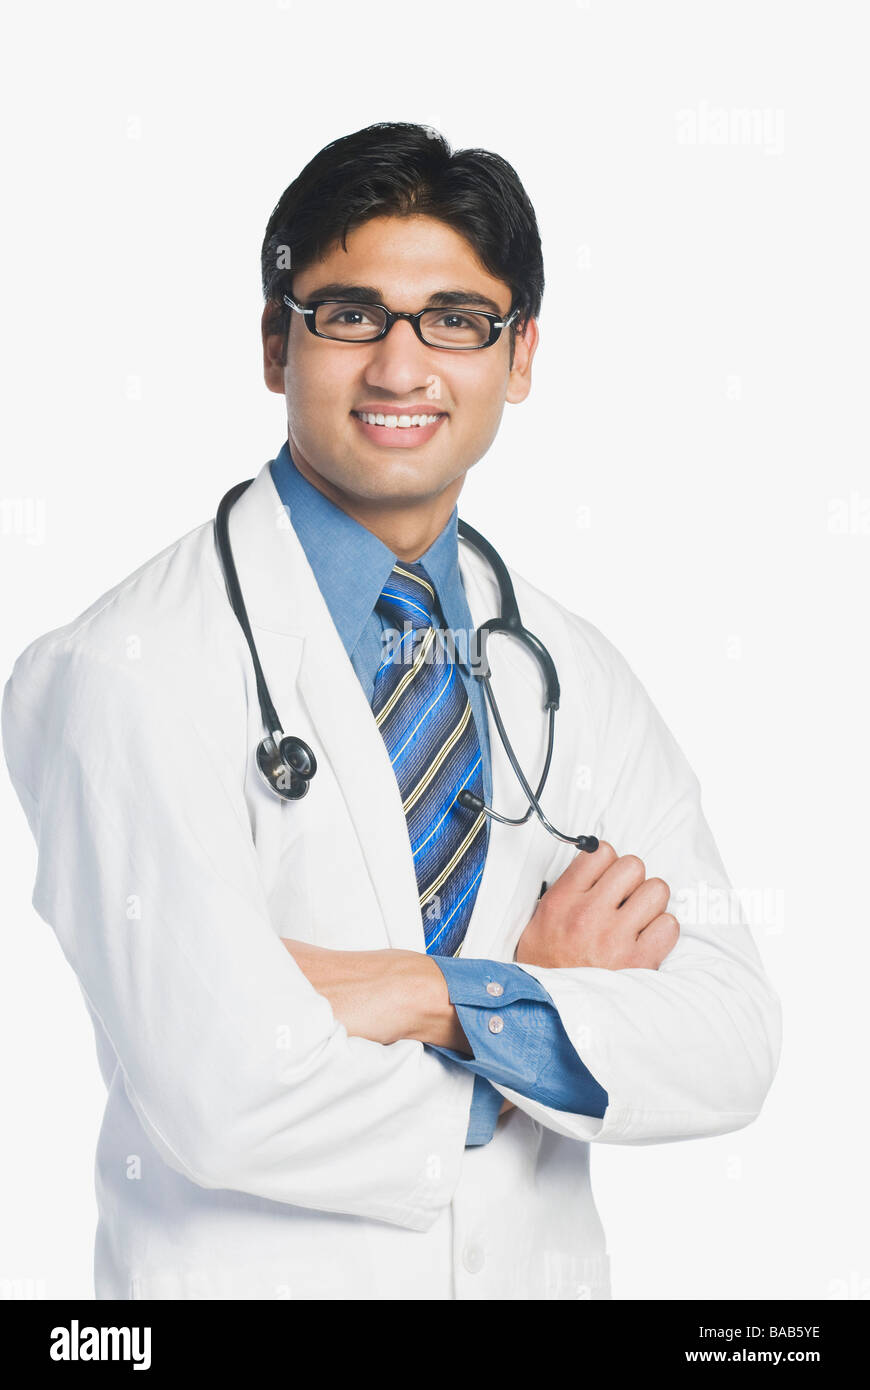 Portrait of a doctor smiling Stock Photo - Alamy